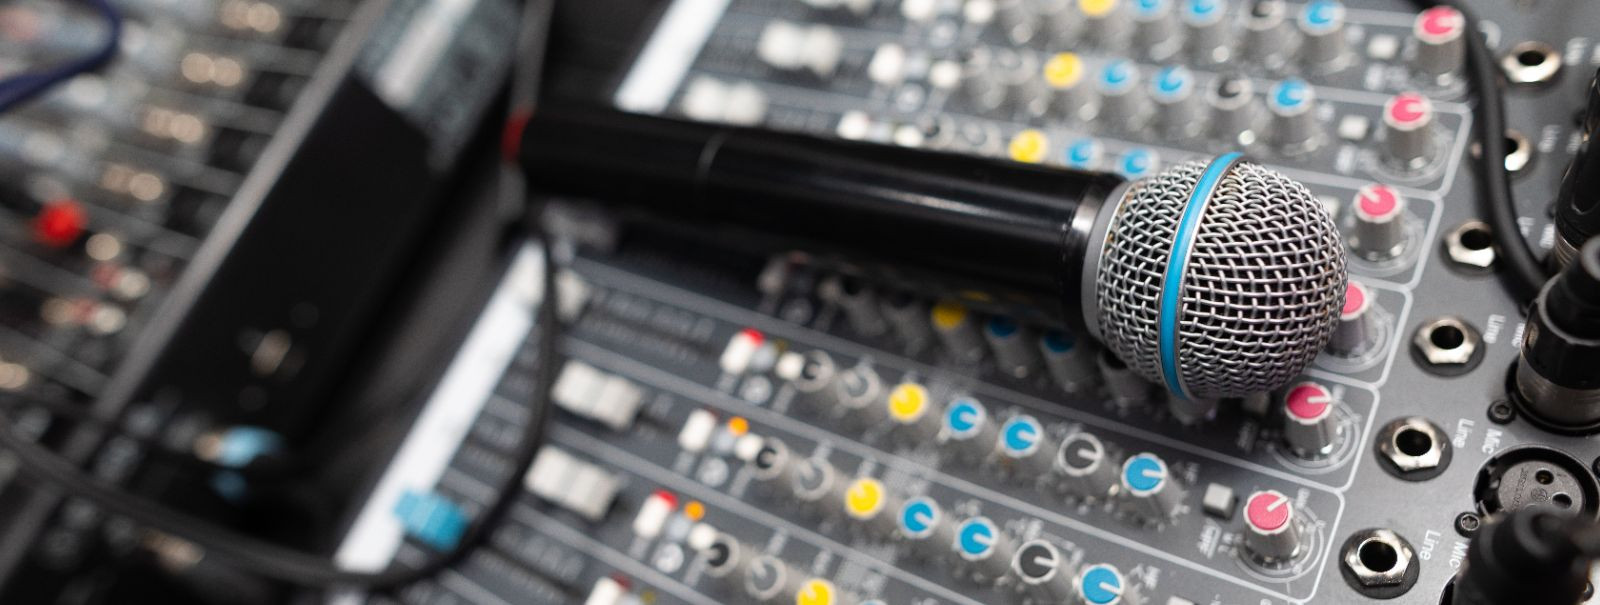 For audio enthusiasts and professionals alike, maintaining the integrity of audio equipment is paramount. But how can you tell when your gear is crying out for 